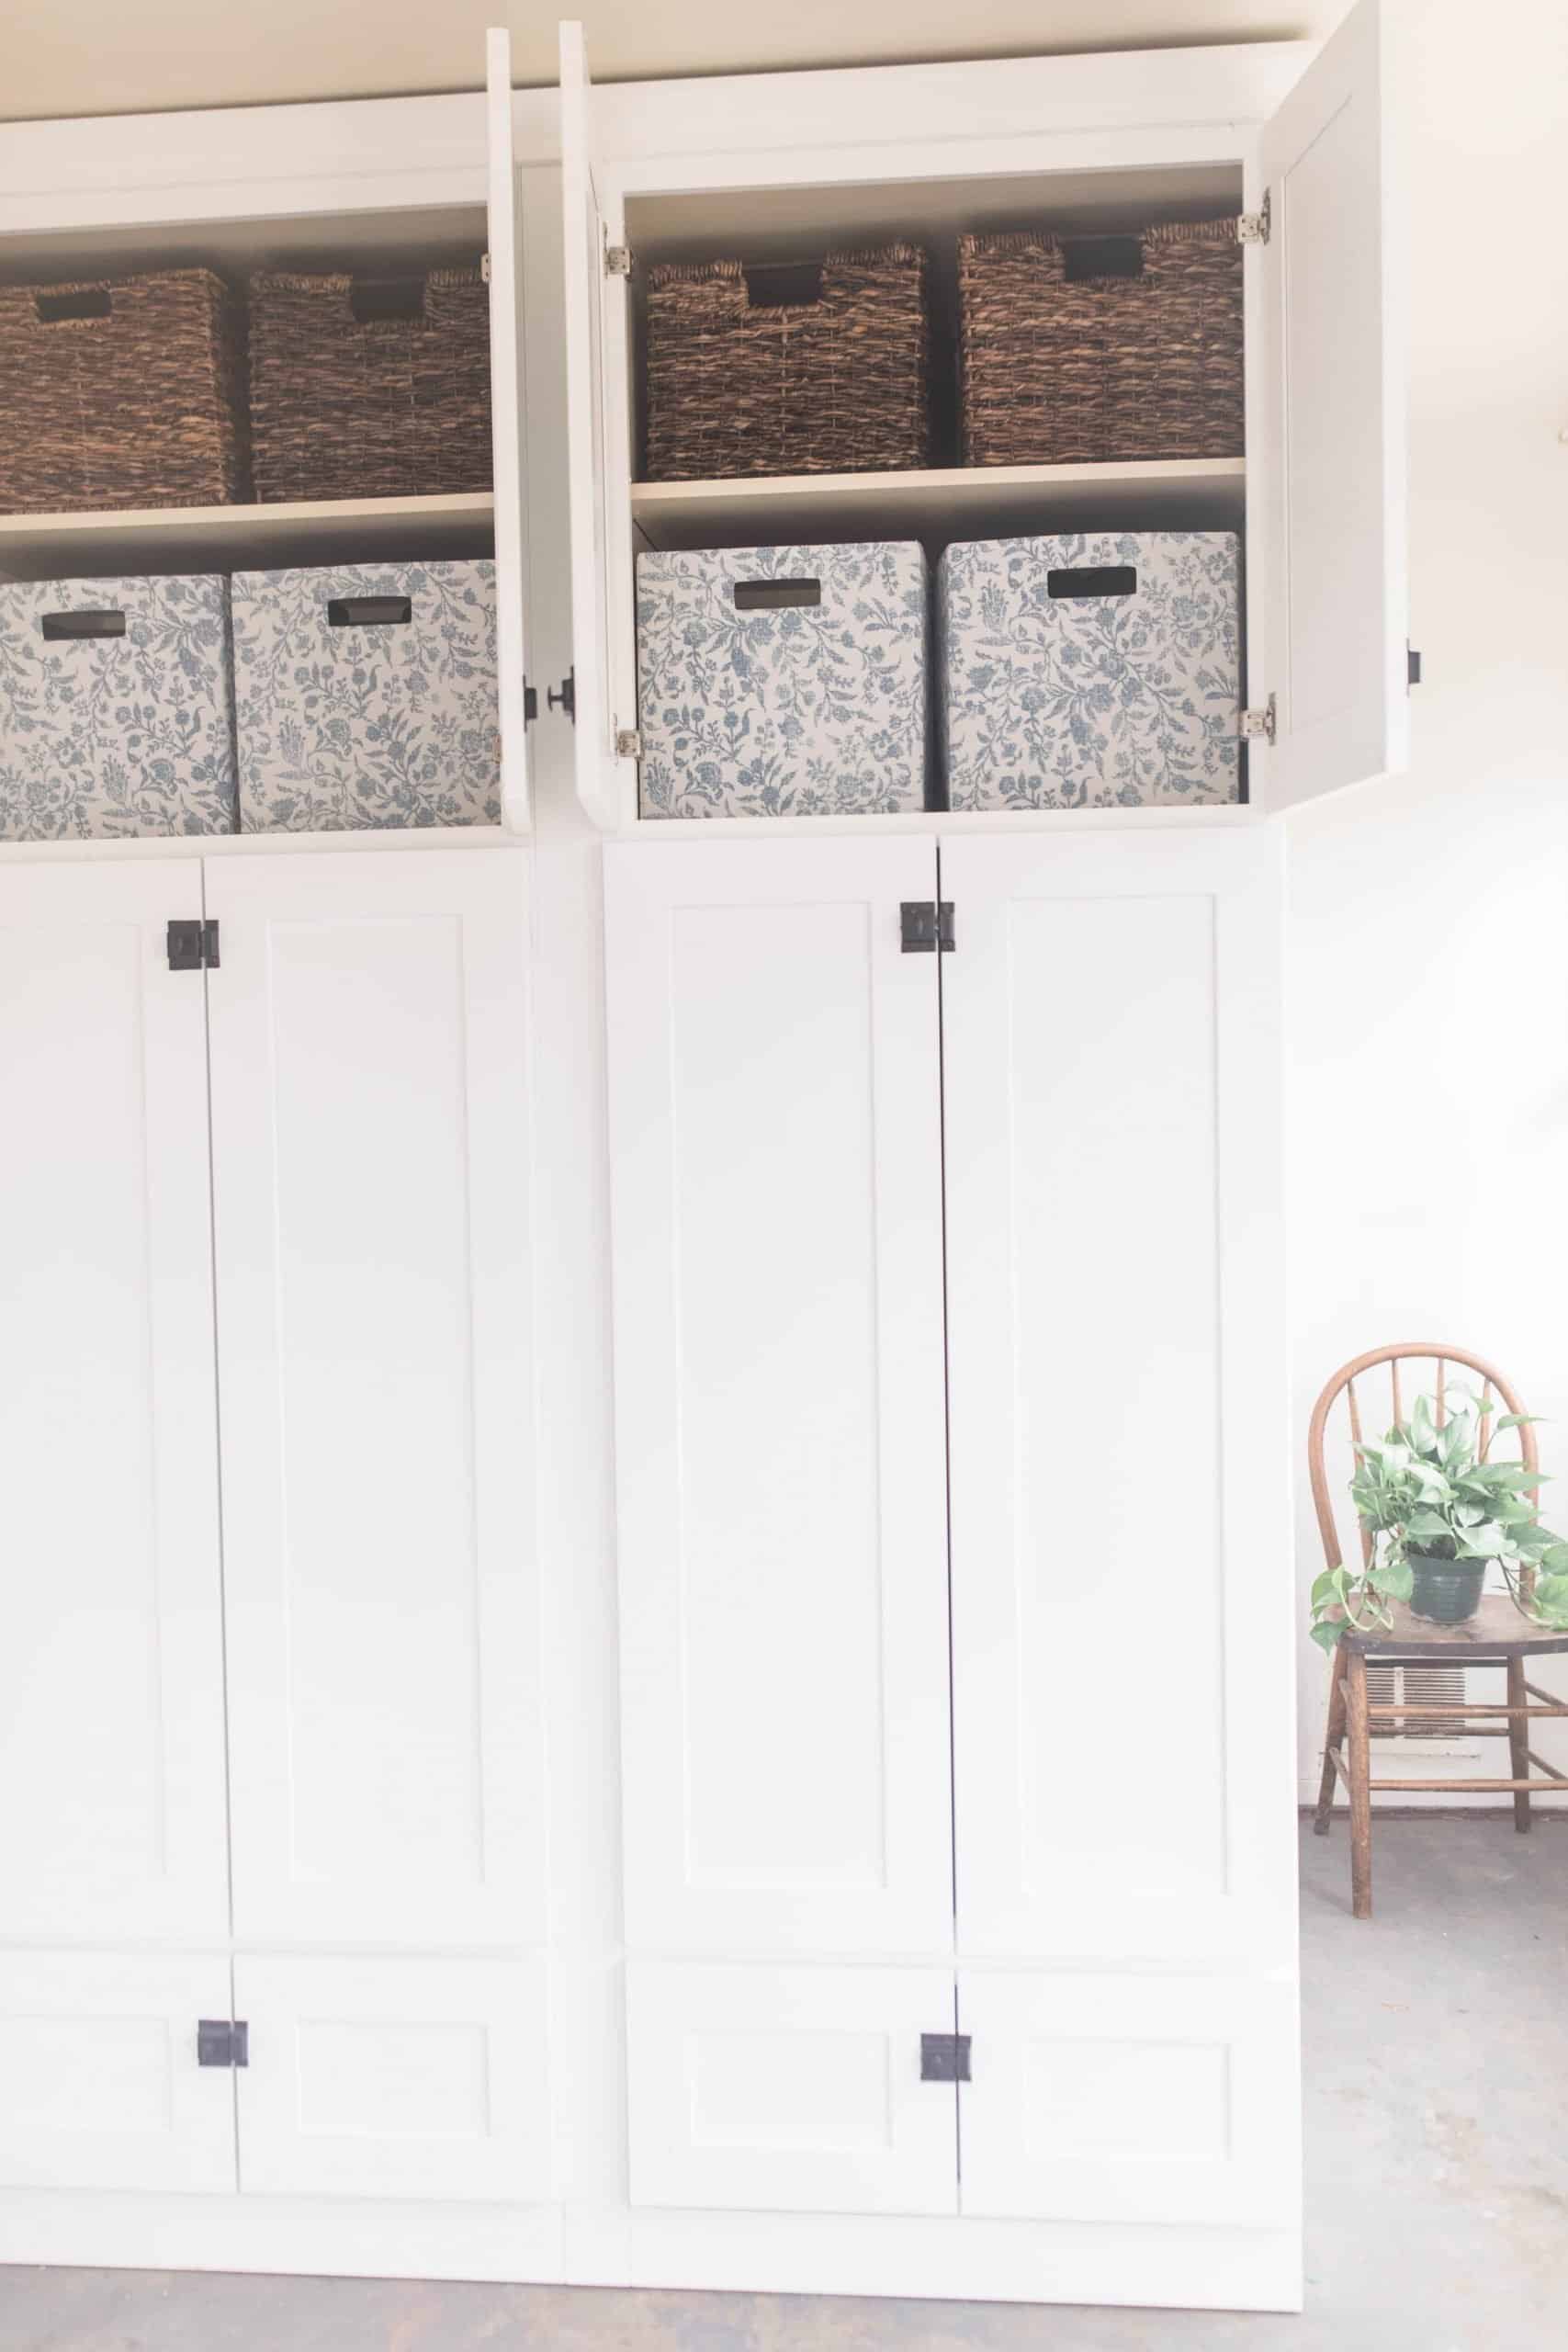 large white cabinet with black latches. Top doors are opening showing can organization